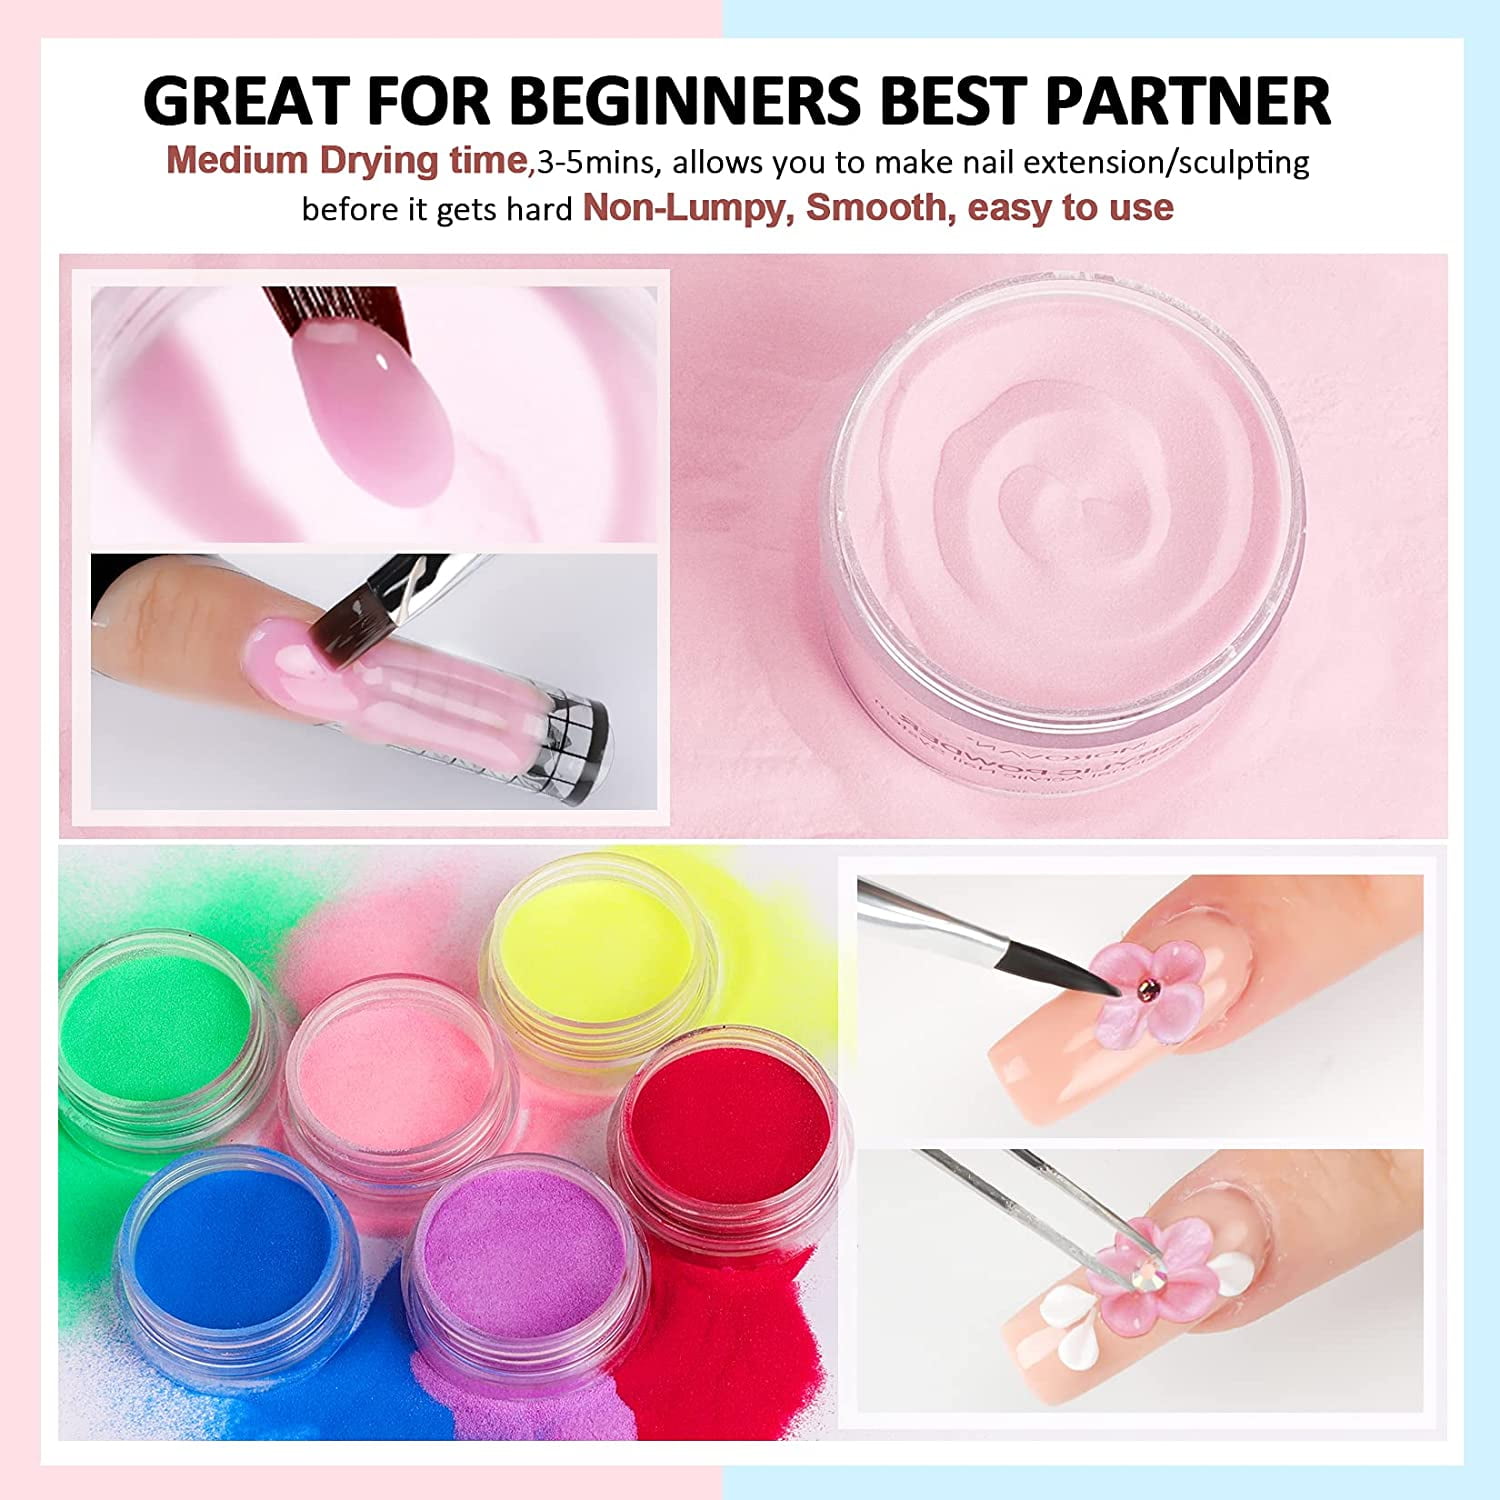 12 Best Acrylic Nail Kits of 2023 - At-Home Acrylic Nail Sets for Beginners  and Pros